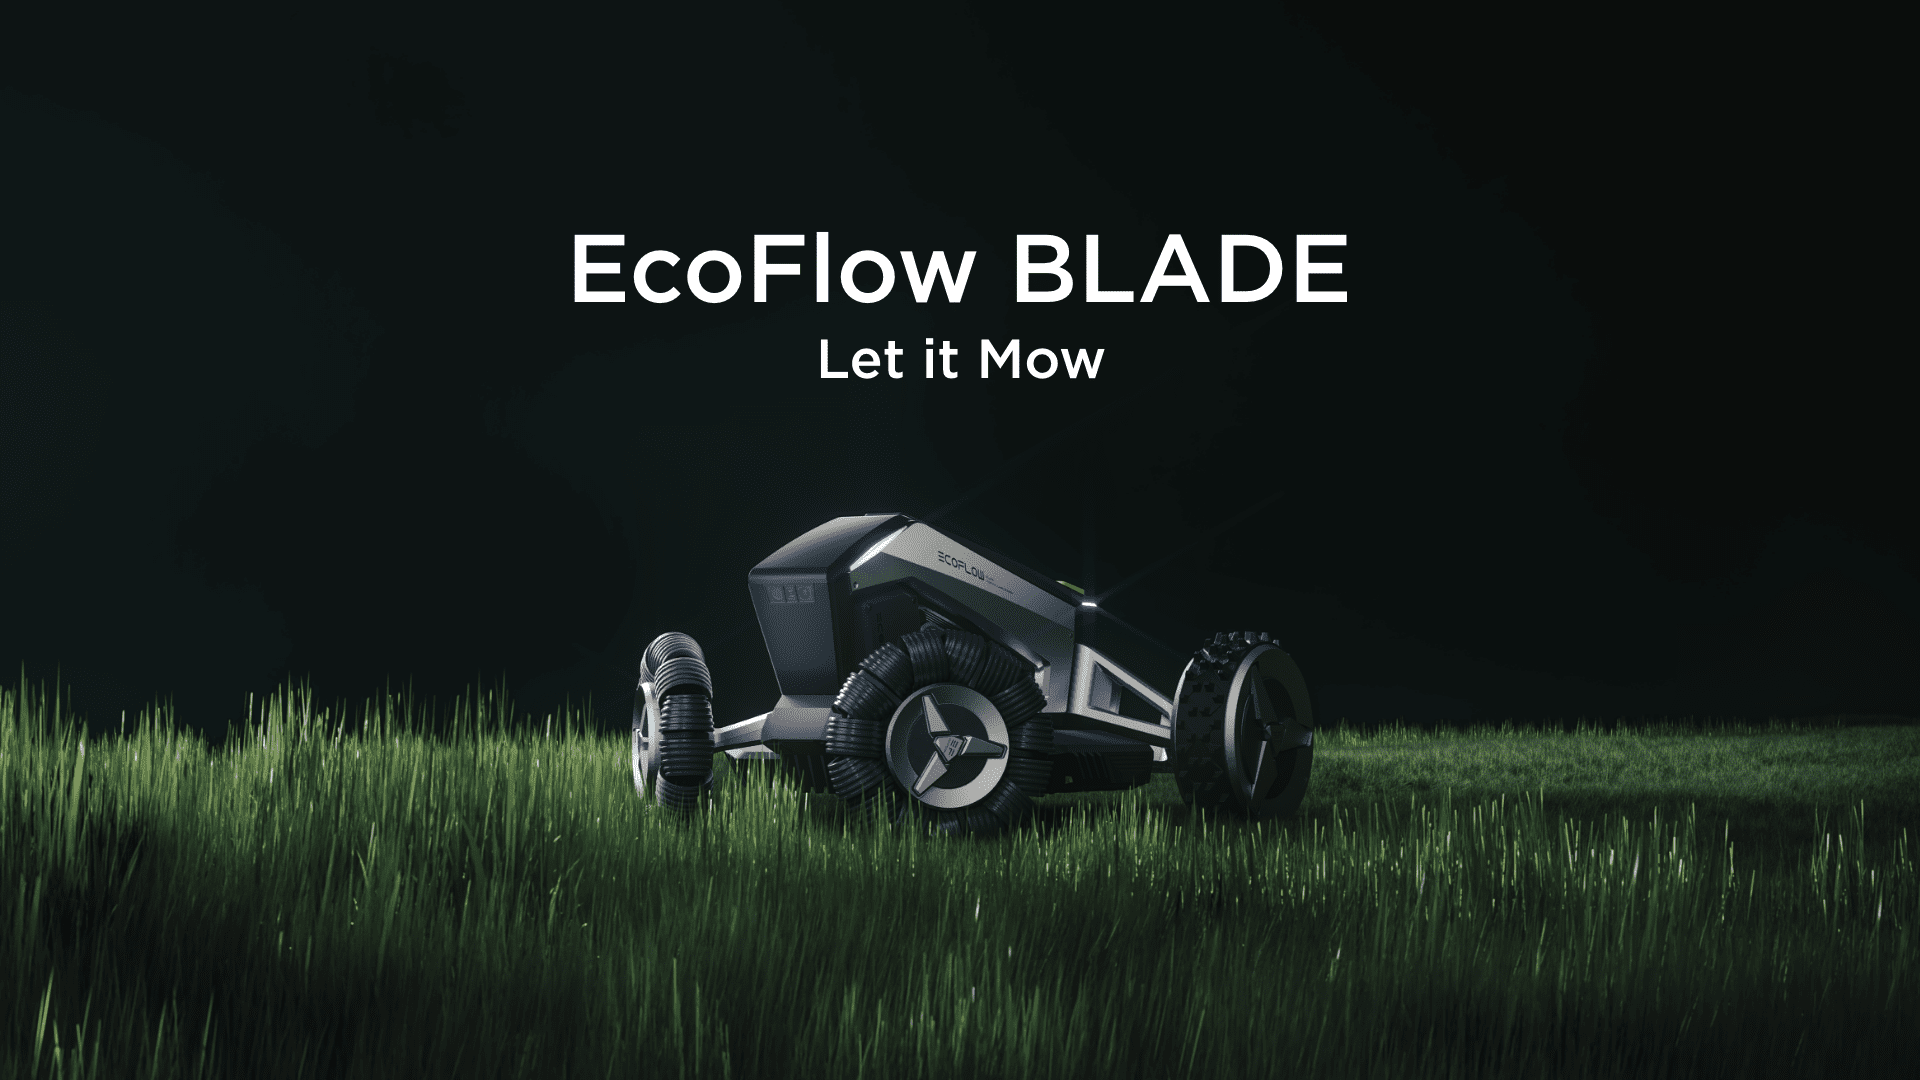 EcoFlow Blade robotic lawn-sweeping mower launched for £2,699